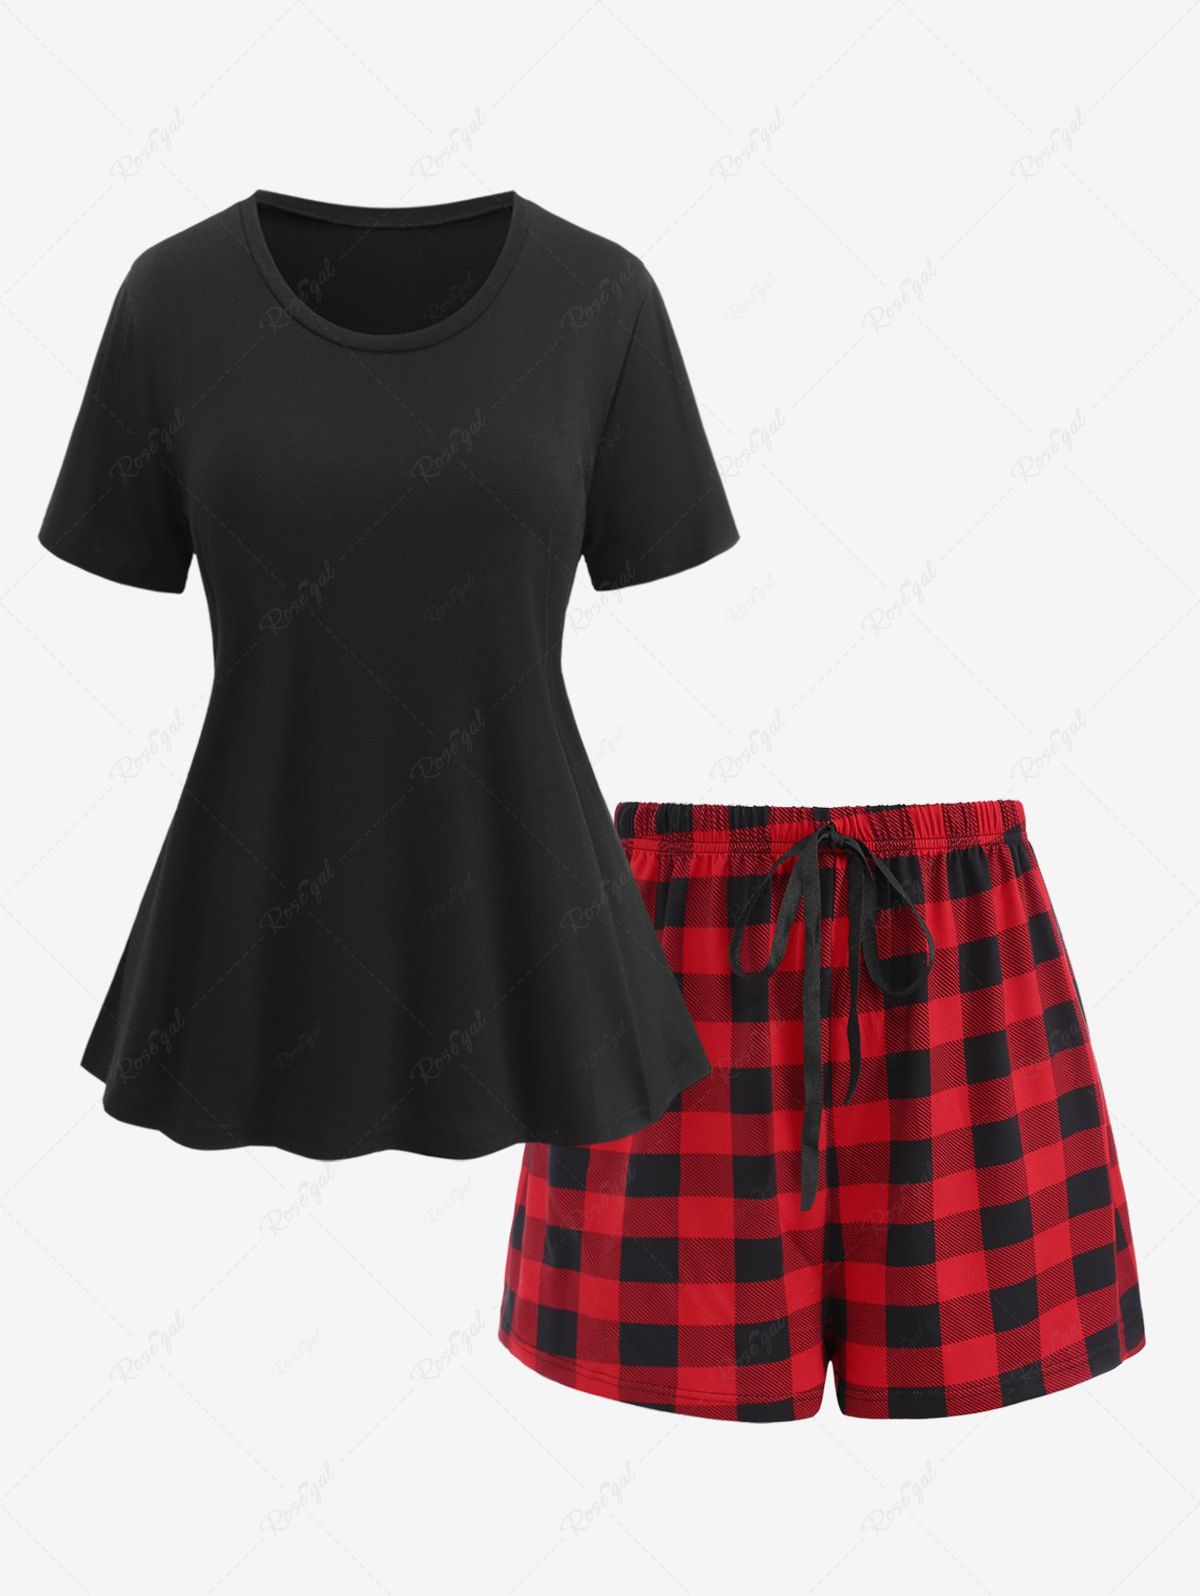 Store Plus Size Solid Color Top and Plaid Bowknot Tied Shorts Pajama Set  